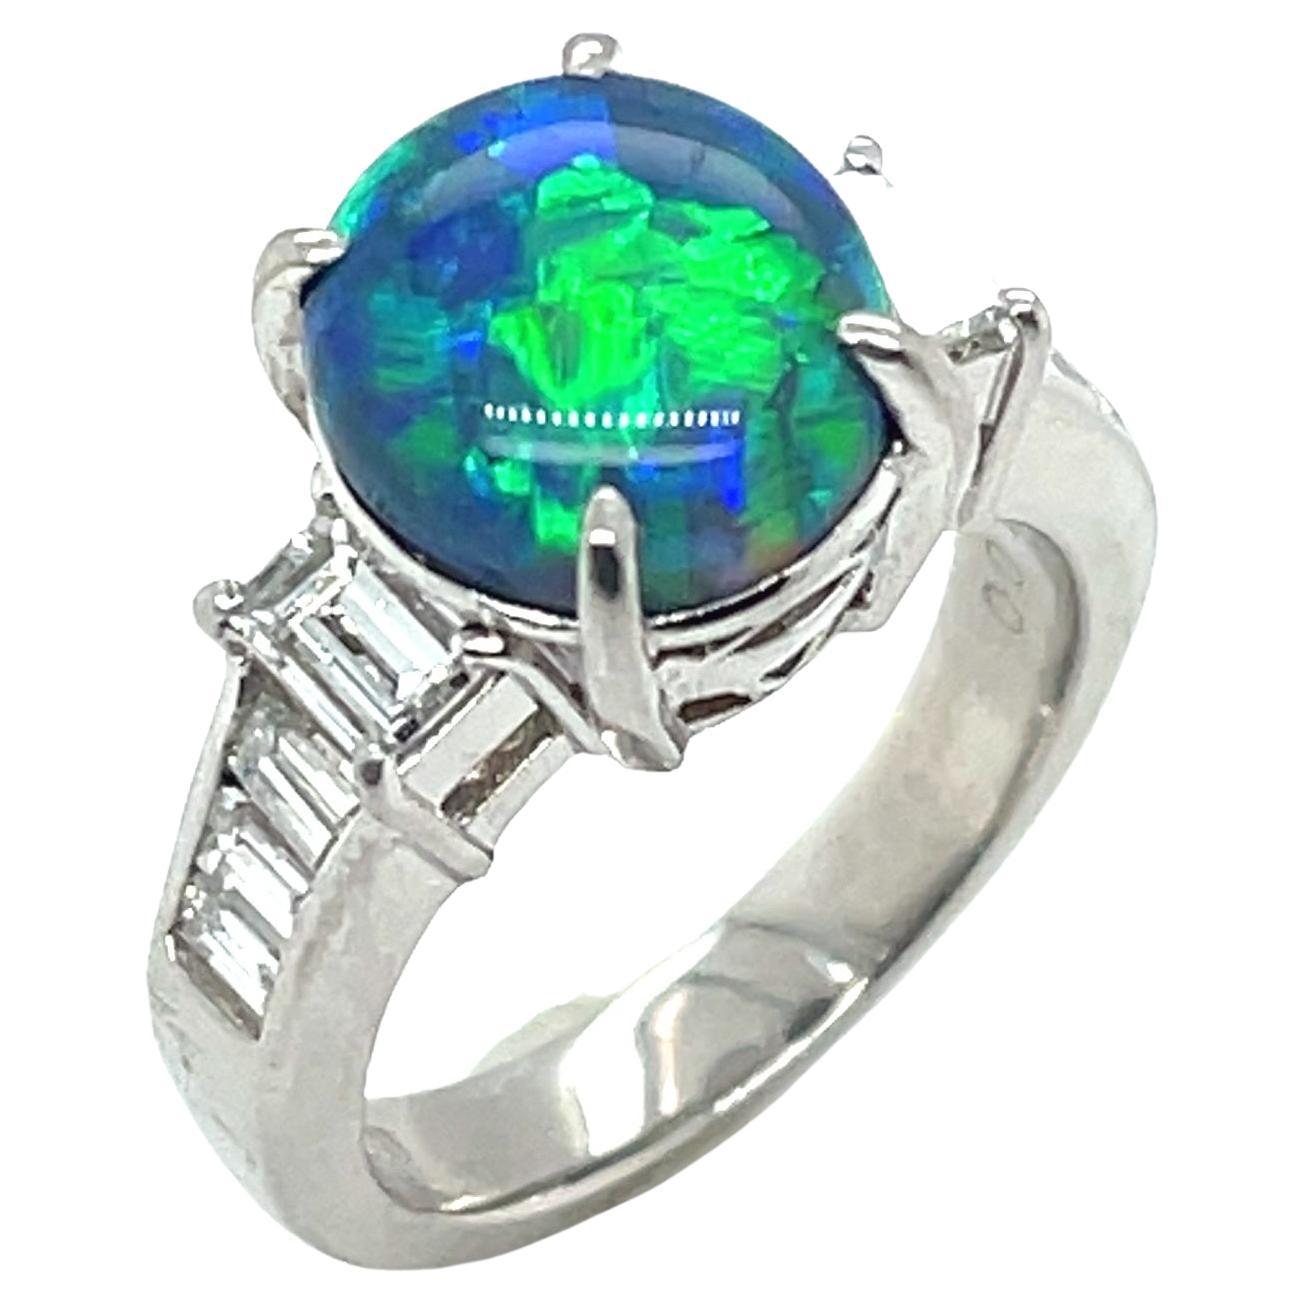 This beautiful platinum ring features a 2.99 carat fine black opal set with sparkling baguette diamonds! The black opal has gorgeous play-of-color including flashes of bright green, turquoise blue and and peacock violet. A large baguette-cut diamond